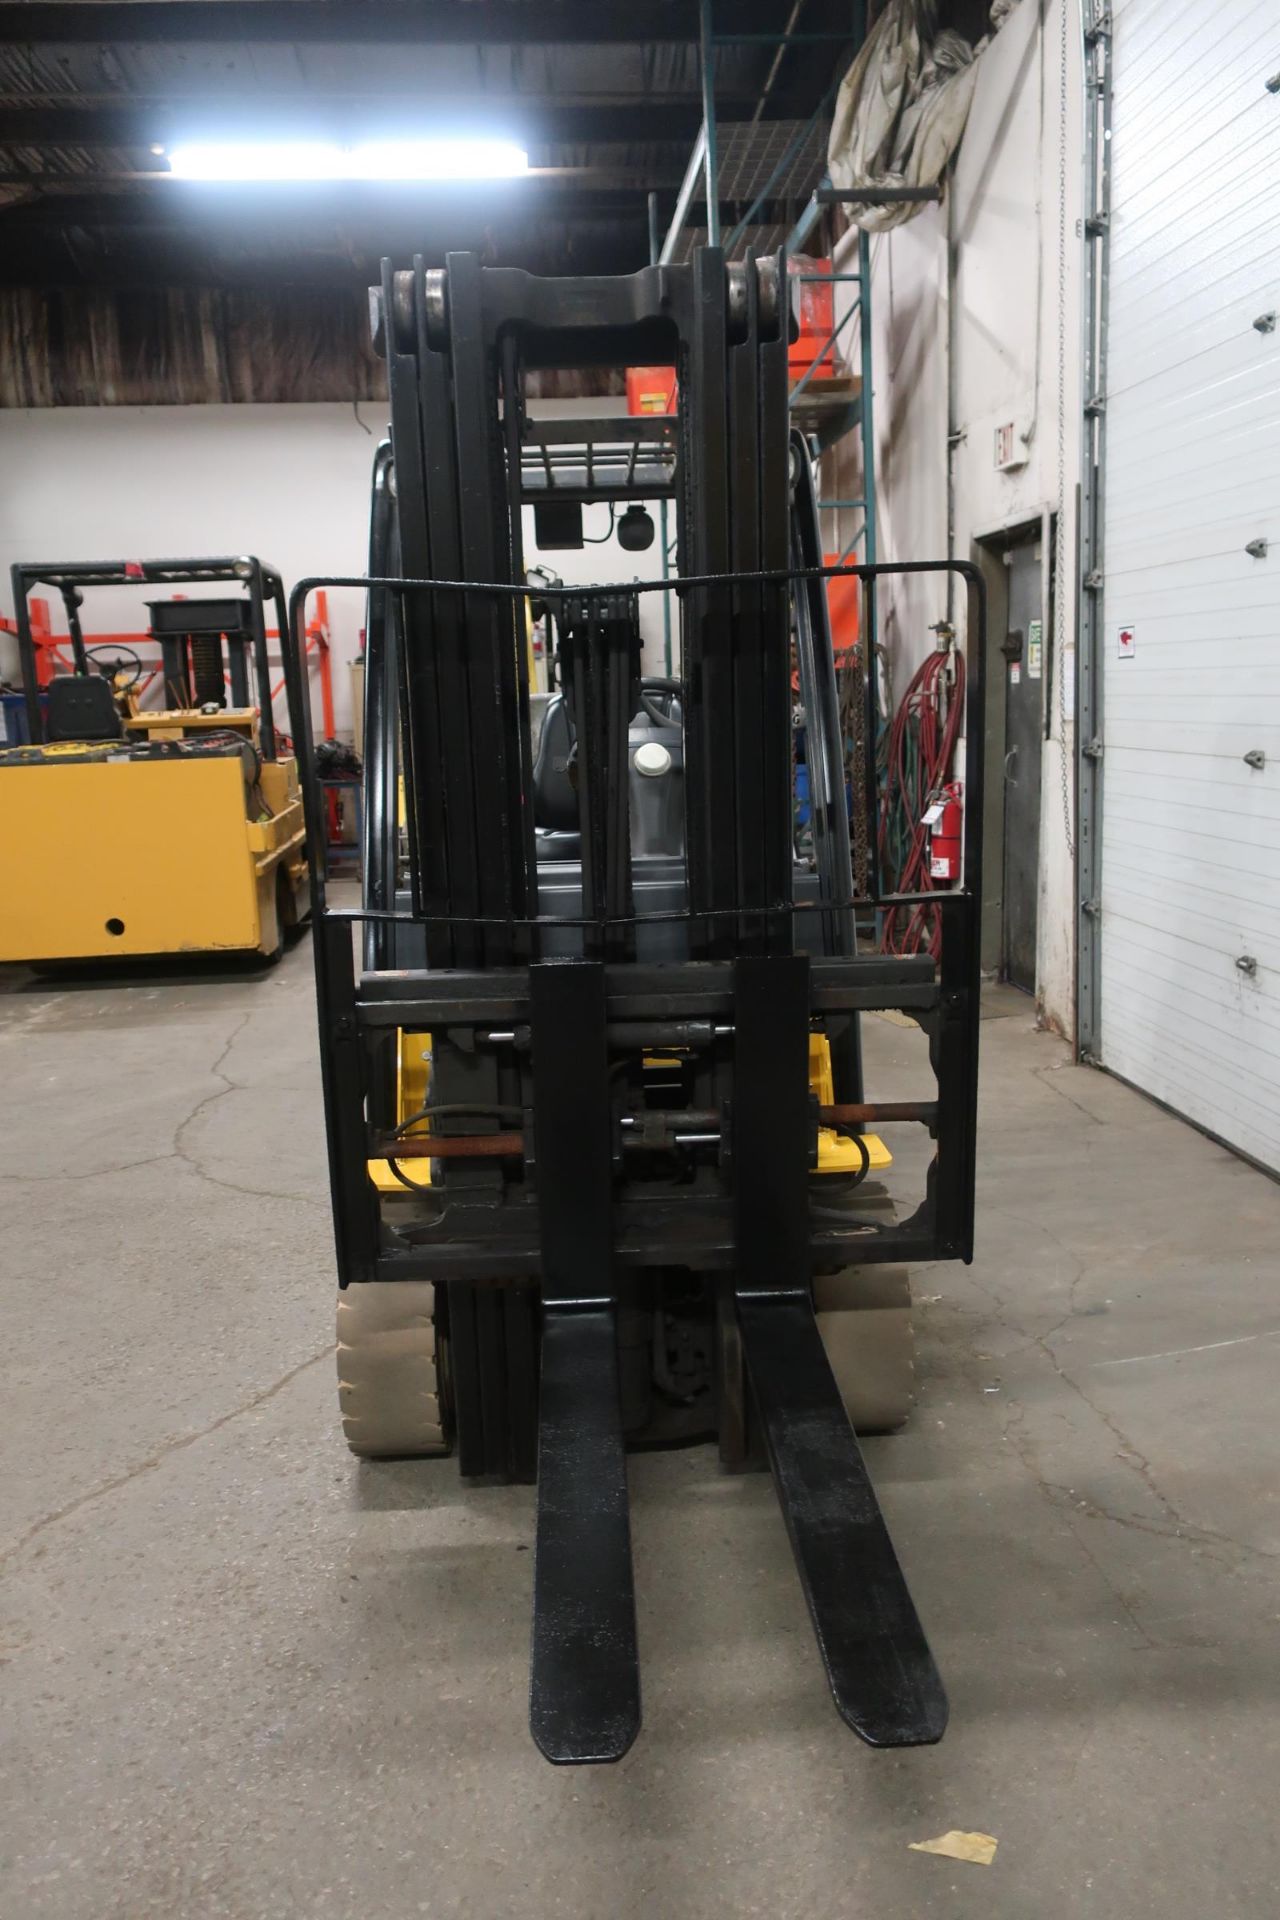 FREE CUSTOMS - 2015 Yale 6000lbs Capacity Forklift with 3-stage mast - LPG (propane) with - Image 2 of 2